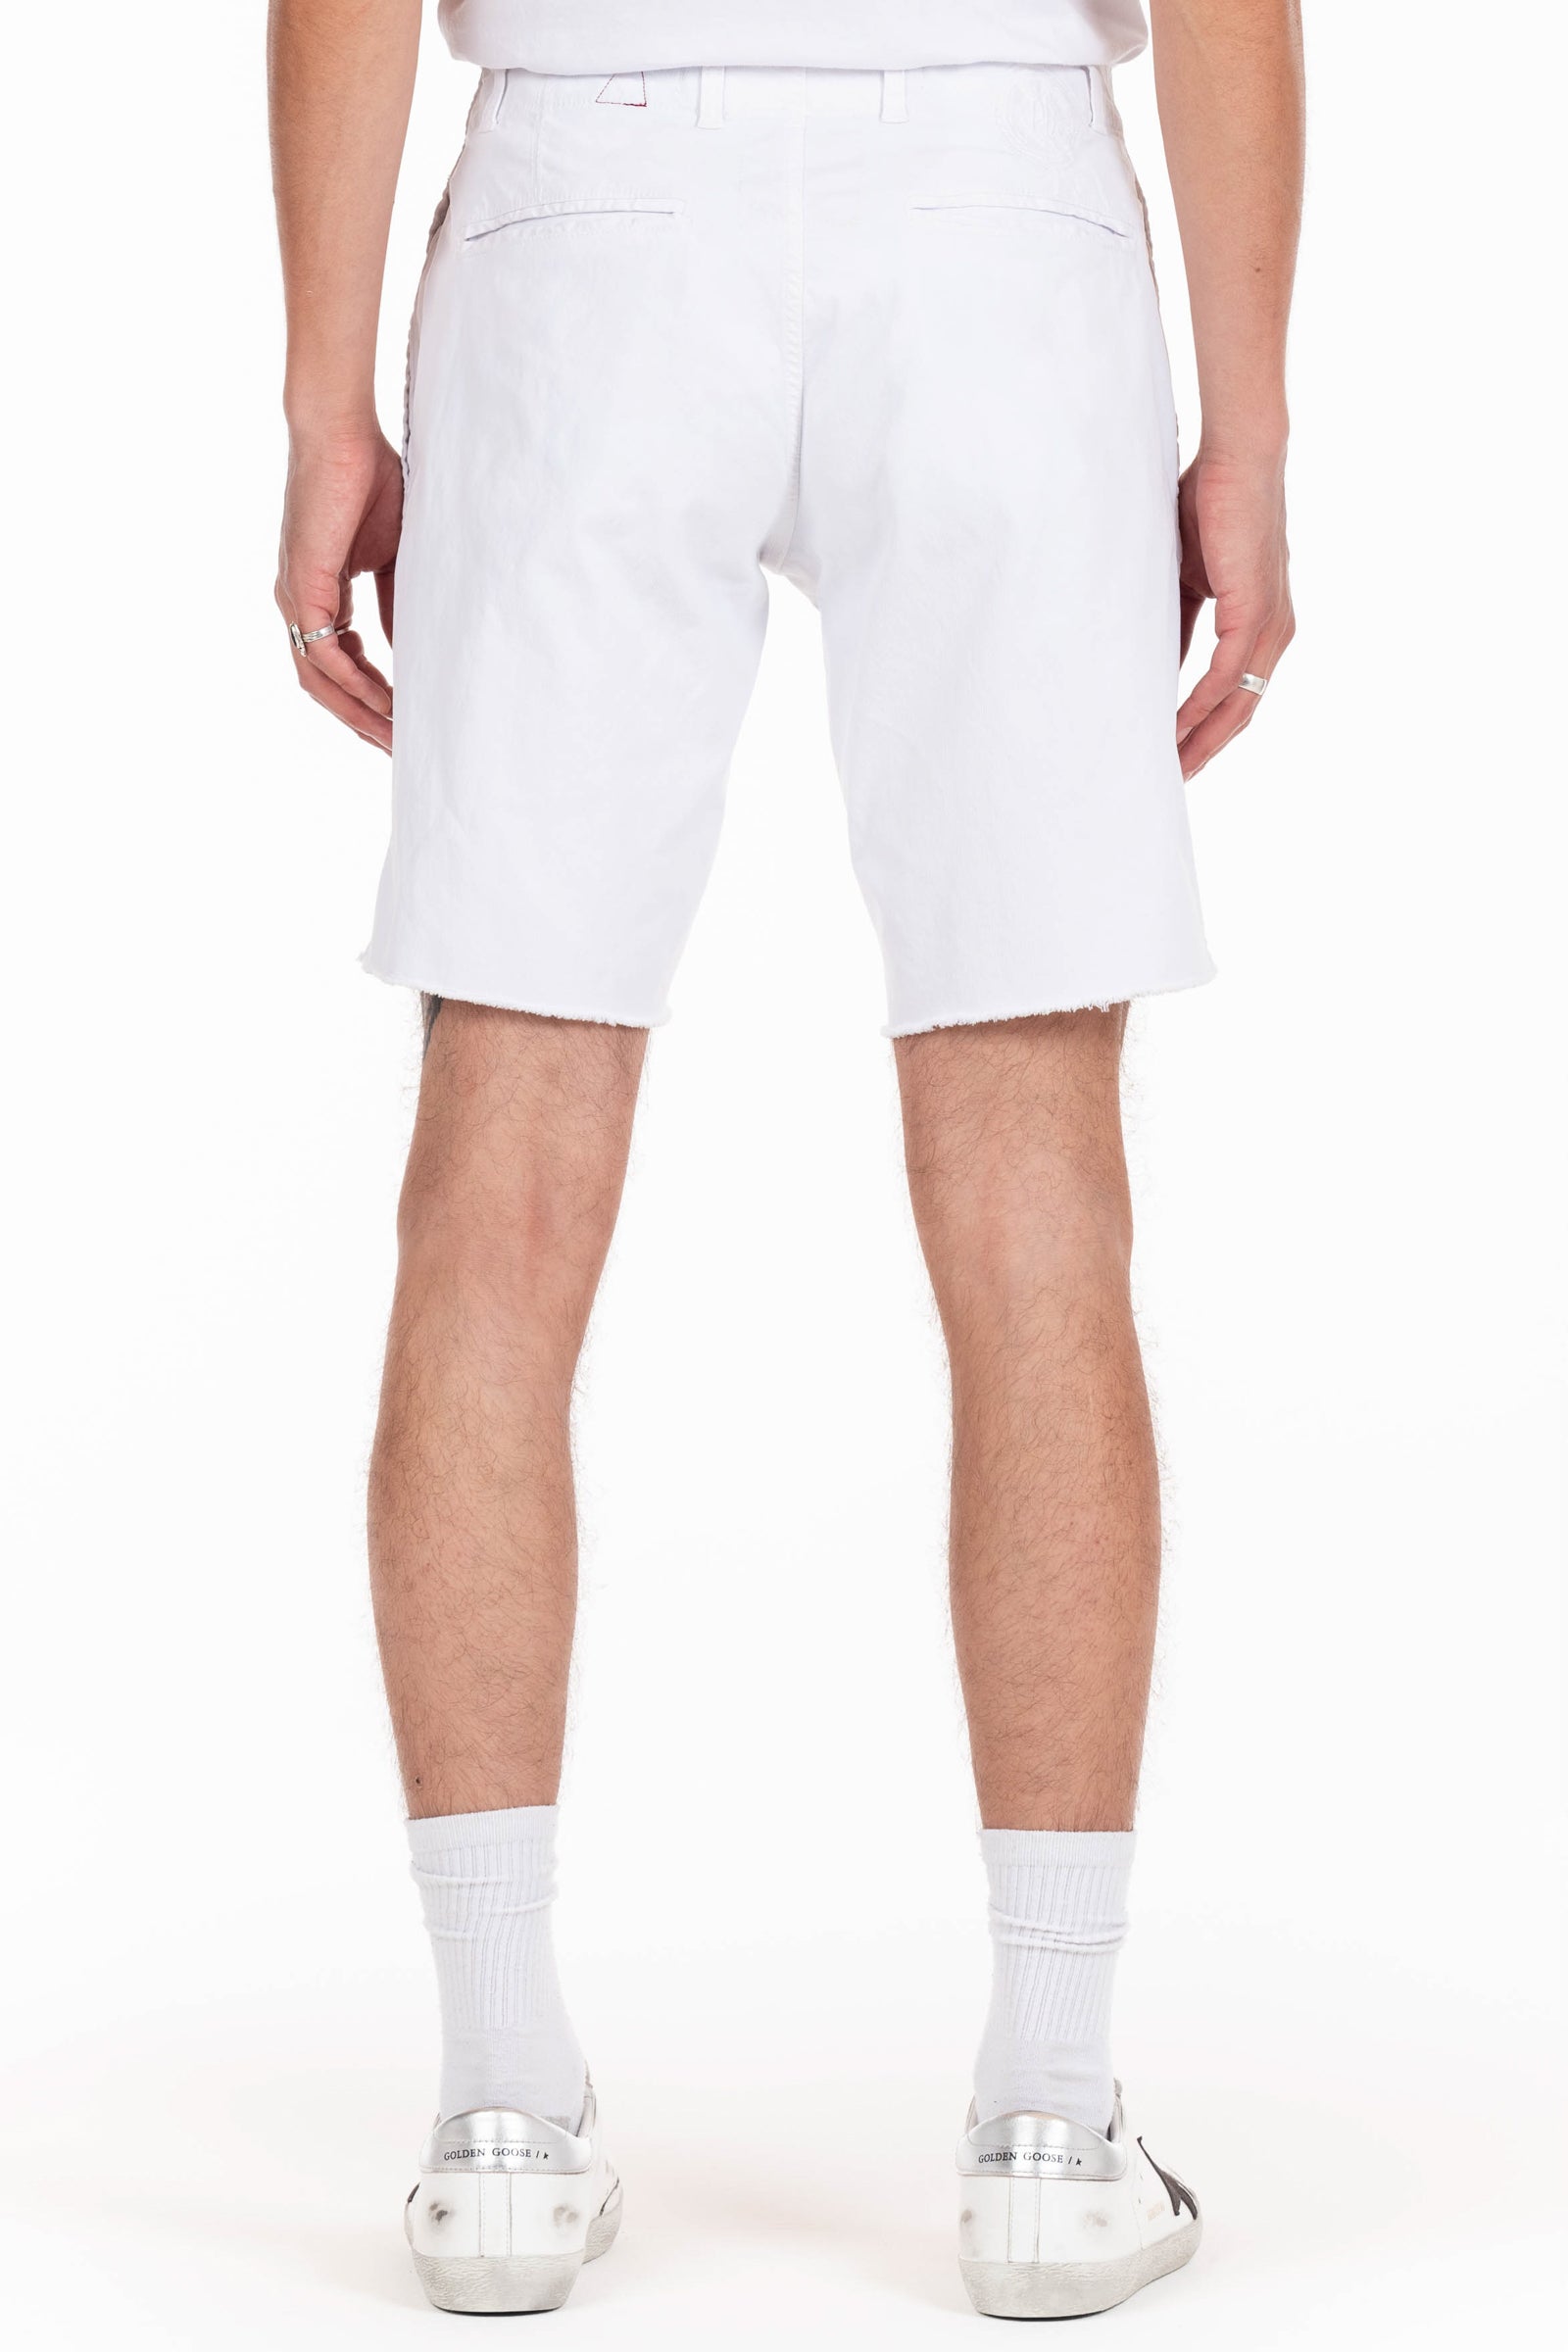 Original Paperbacks Rockland Chino Short in White on Model Cropped Back View